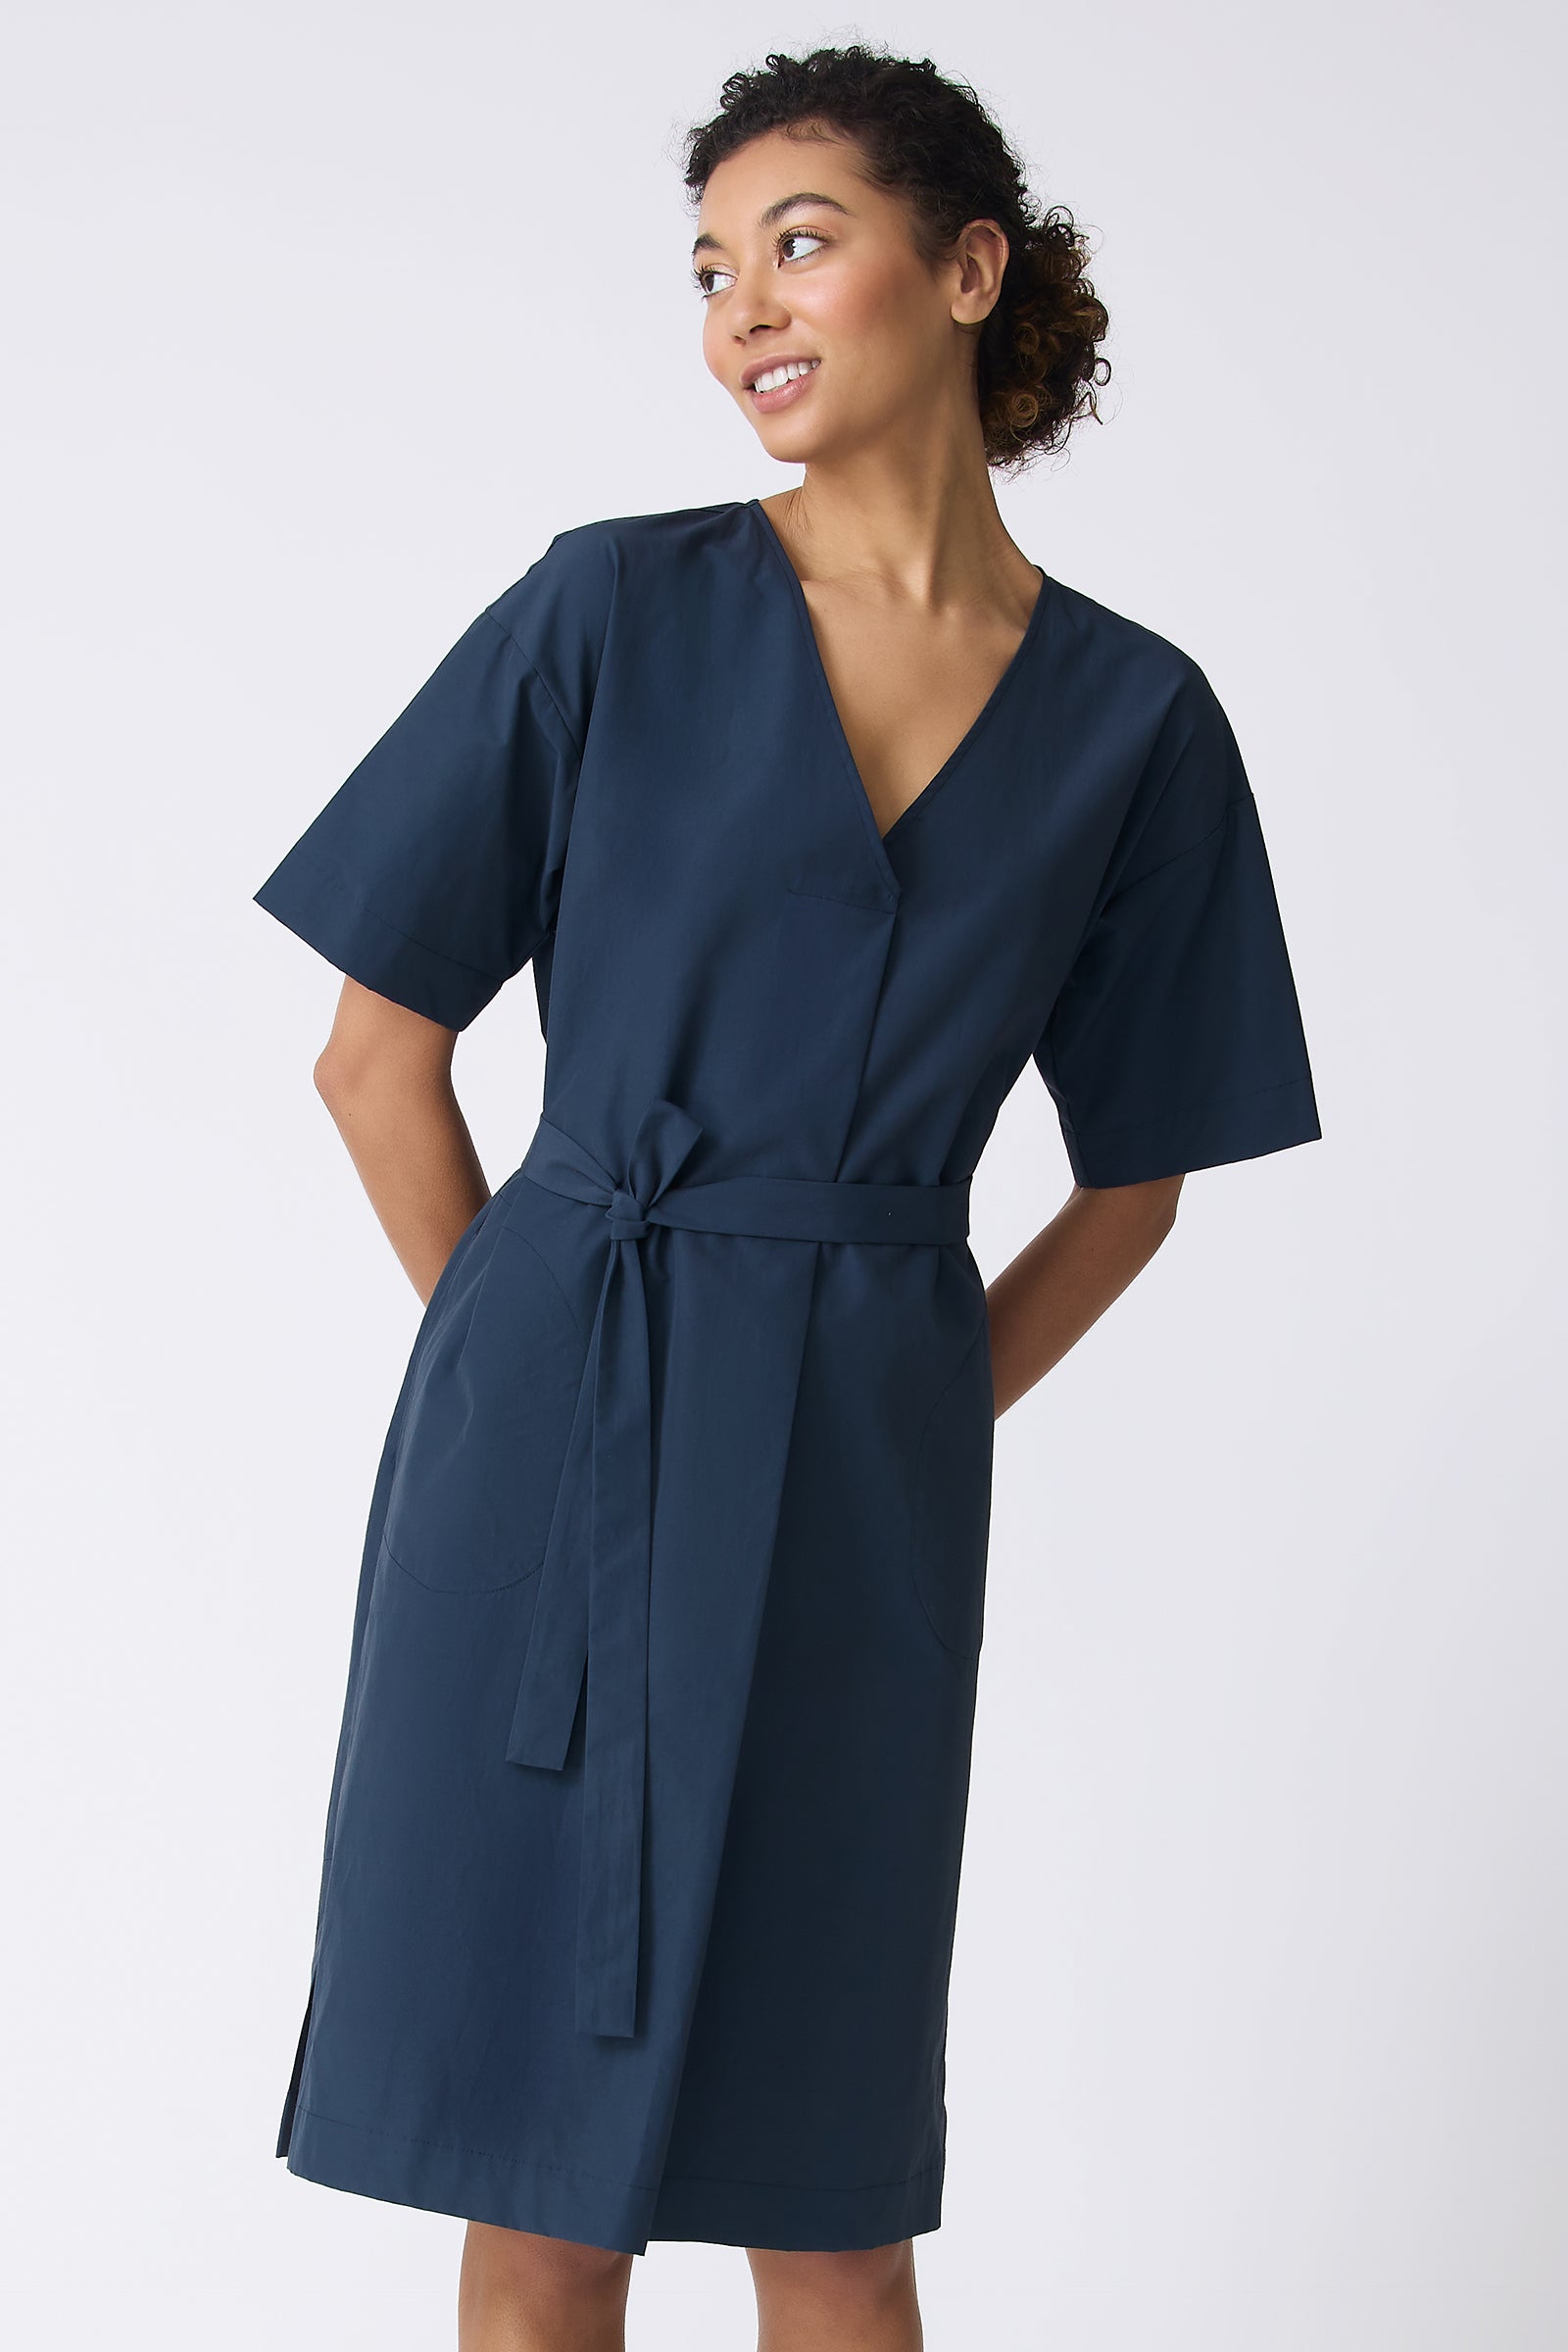 Kal Rieman Cara Fold Front Dress in Summer Navy on model looking right front view